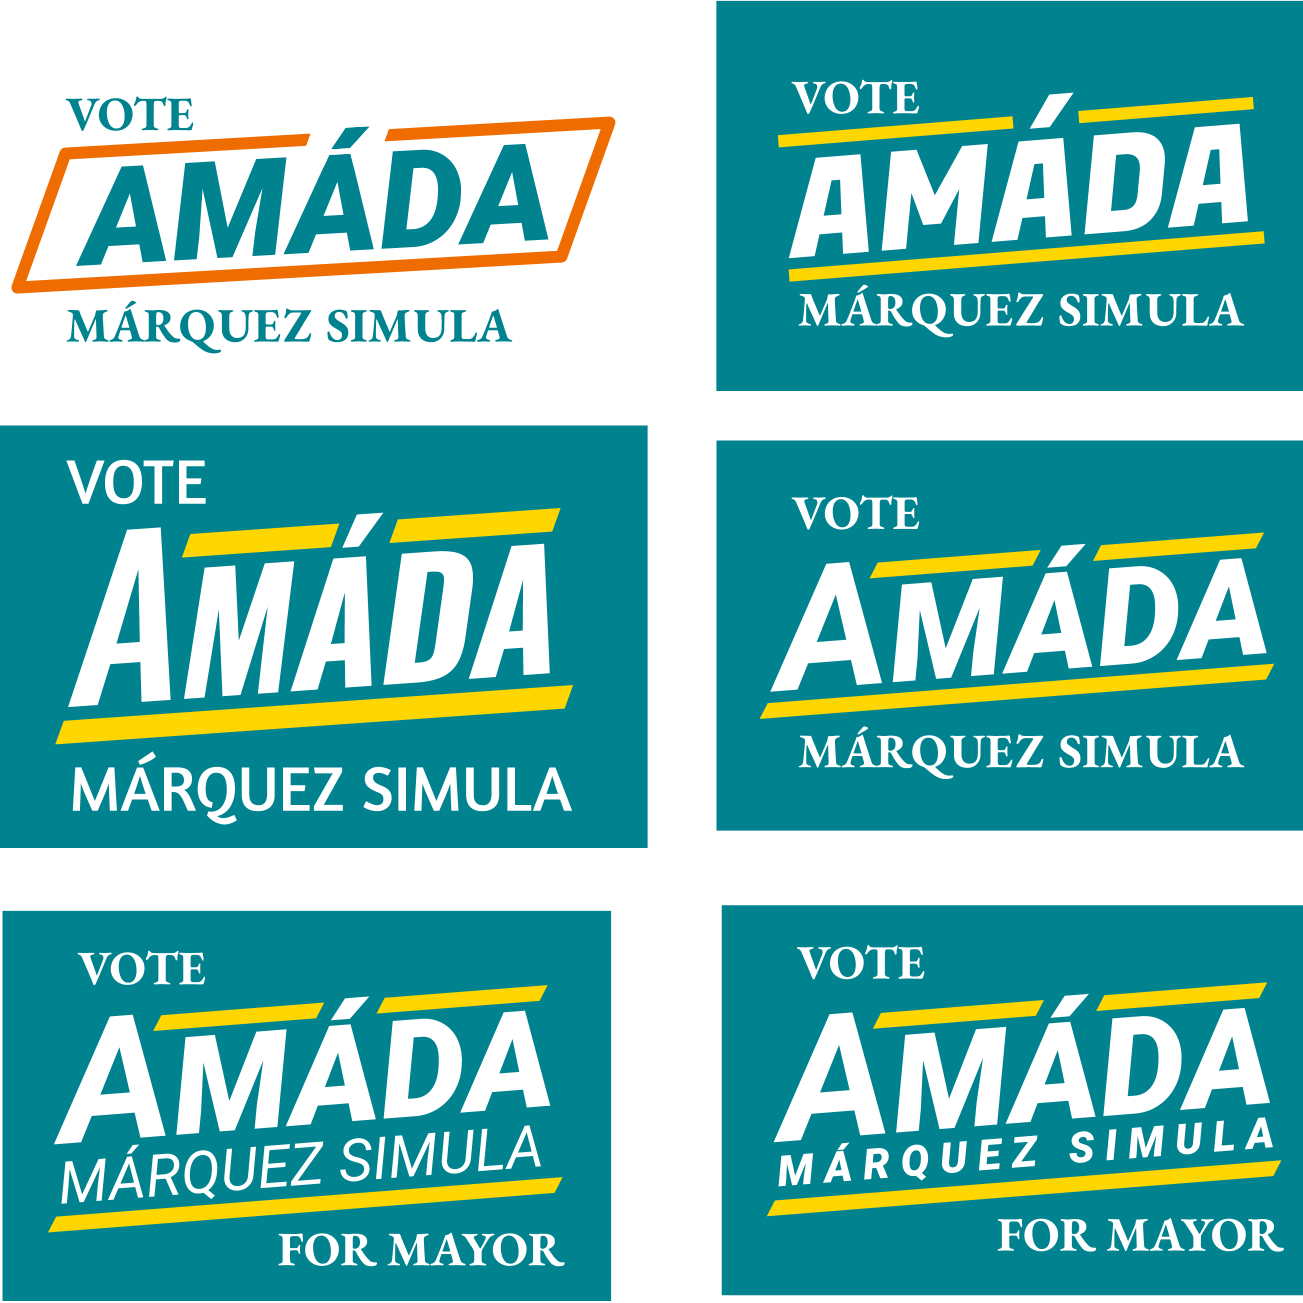 Political campaign branding concepts for Amáda Márquez Simula, using a variety of typefaces.